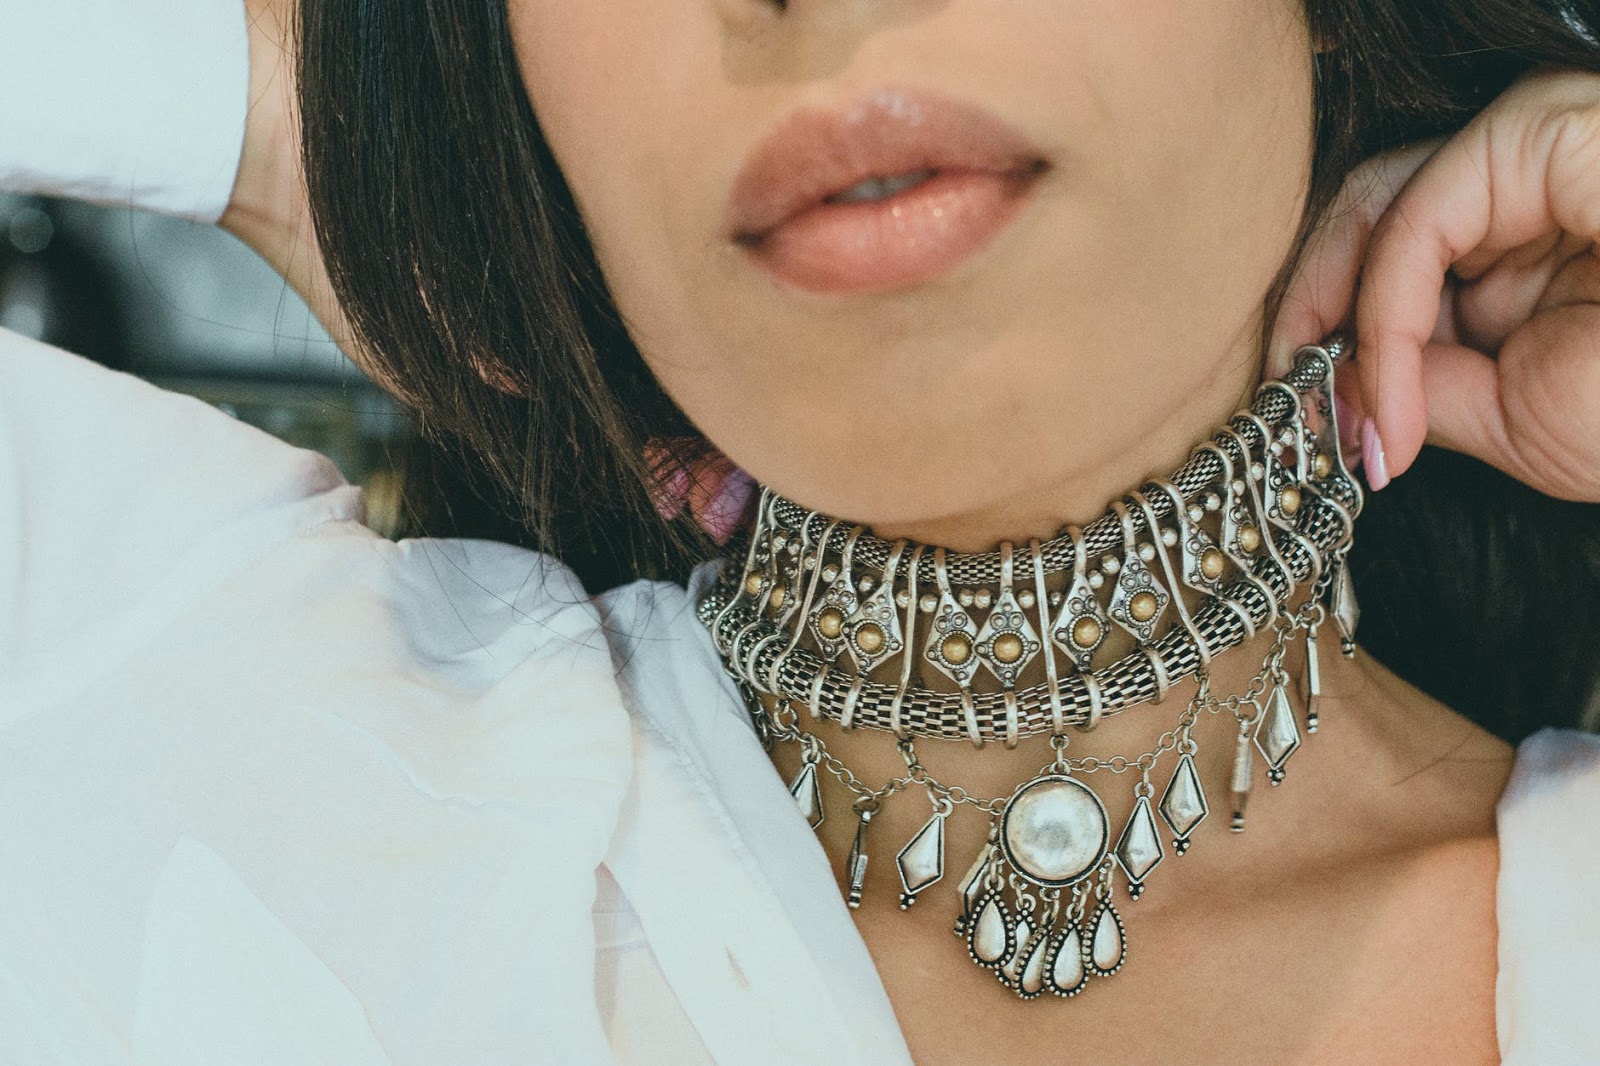 woman is wearing beautiful statement necklace on her neck